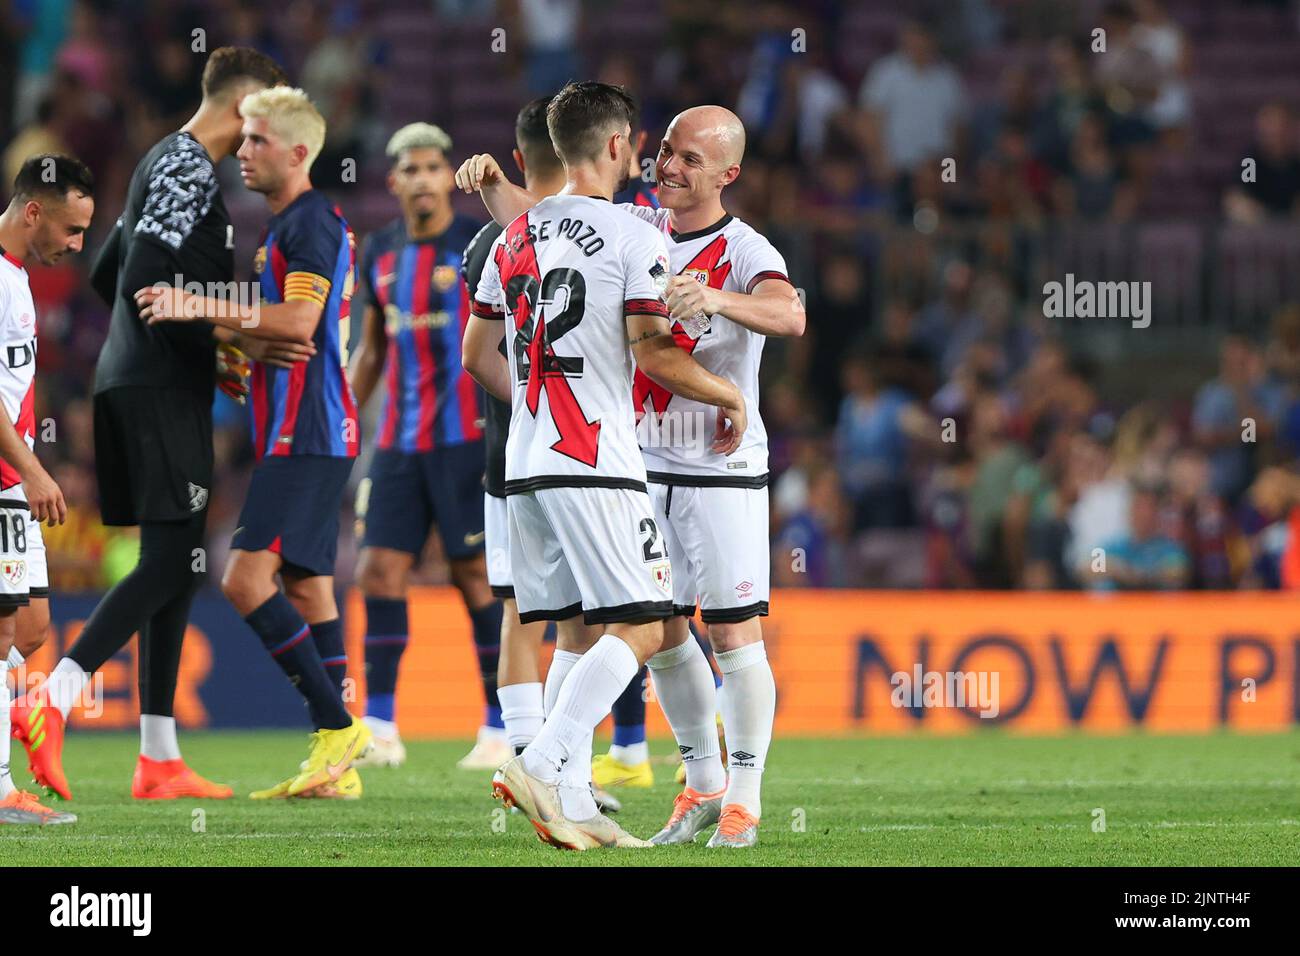 Isi Palazon of Rayo Vallecano with Jose Pozo of Rayo Vallecano during the Liga match between FC Barcelona and Rayo Vallecano at Spotify Camp Nou in Barcelona, Spain. Stock Photo